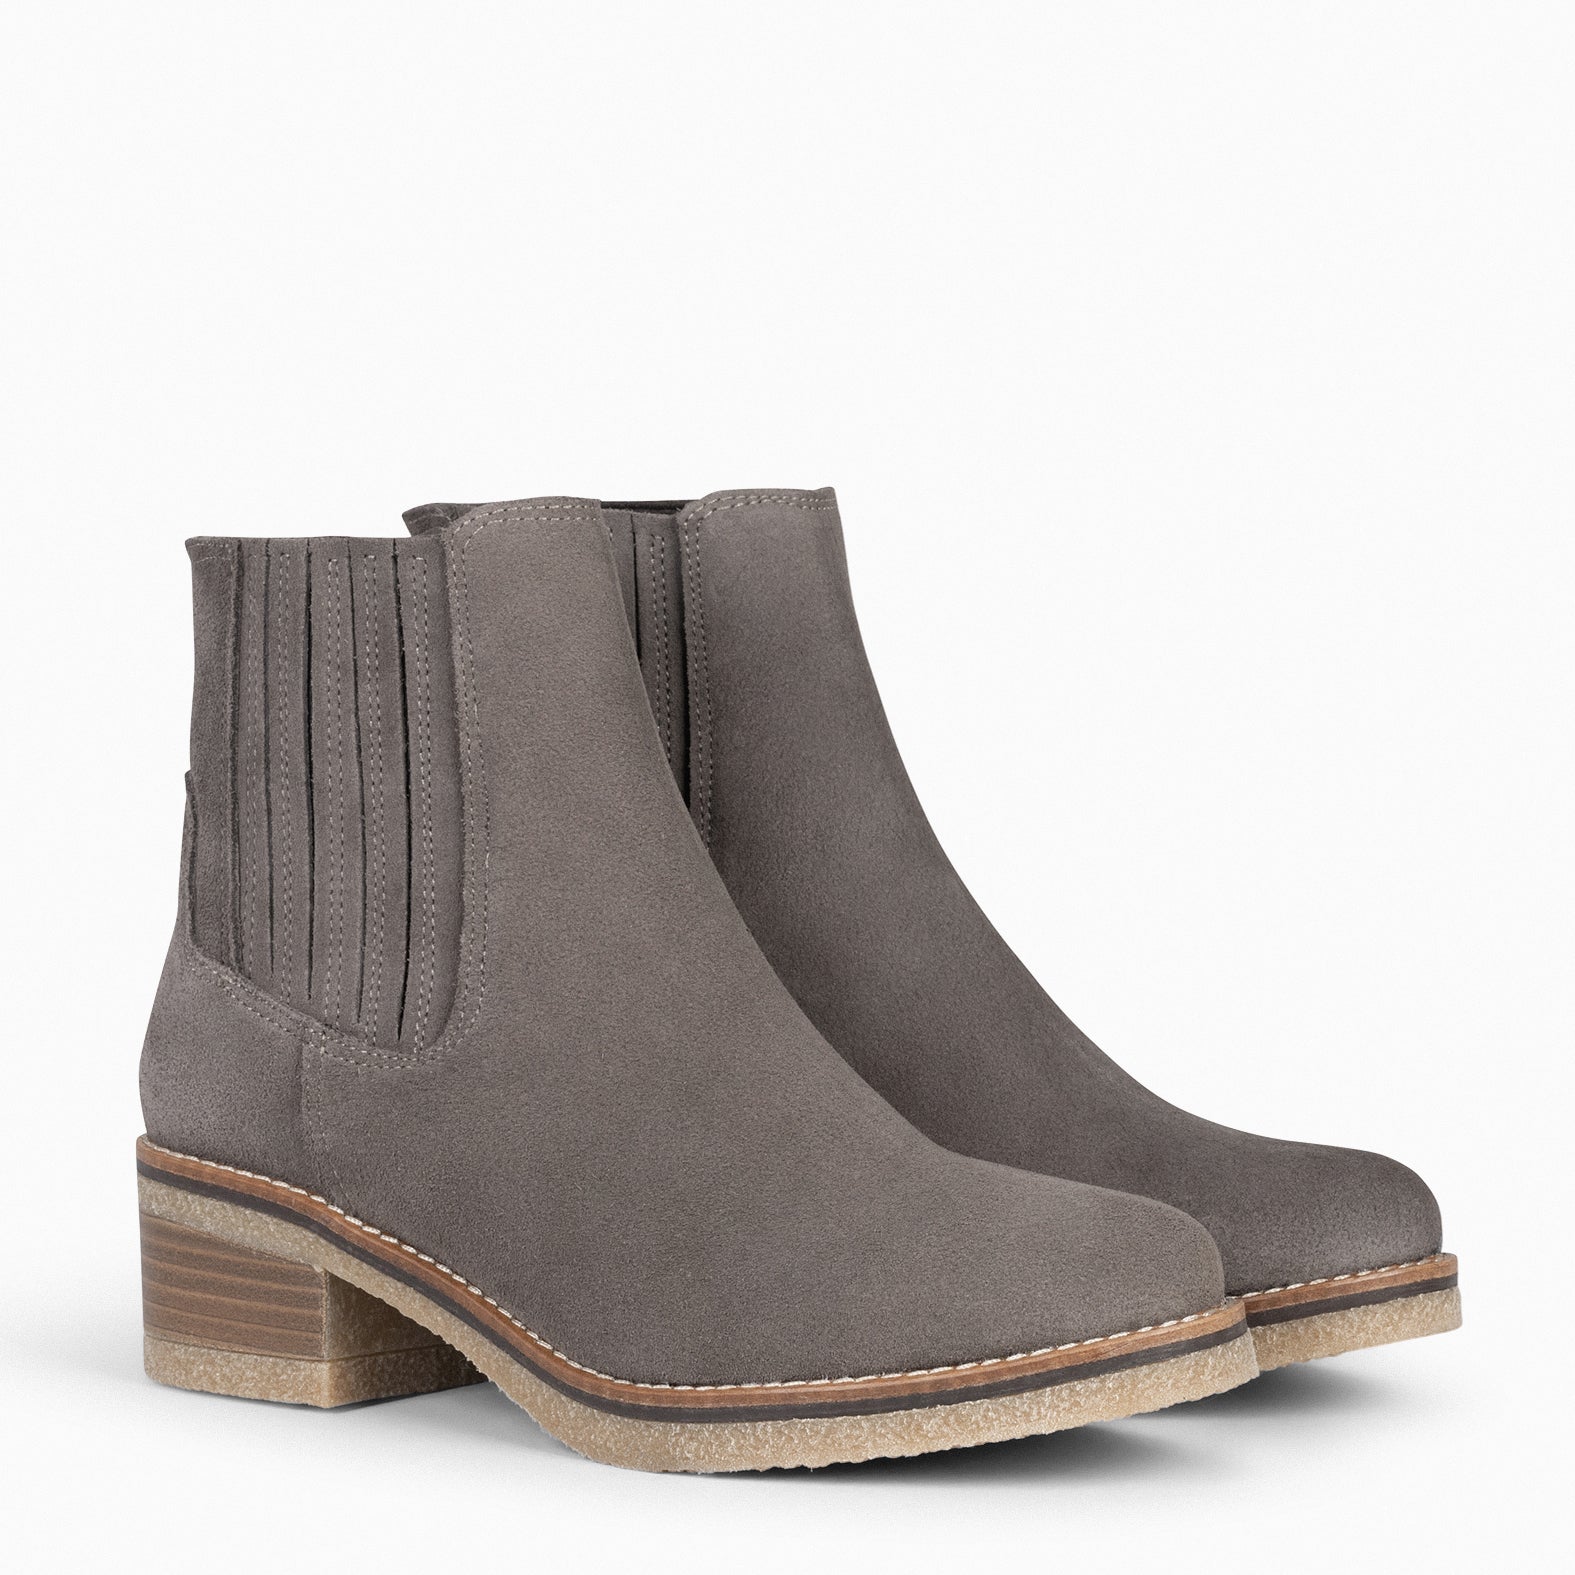 COUNTRY - TAUPE Country Women Booties 